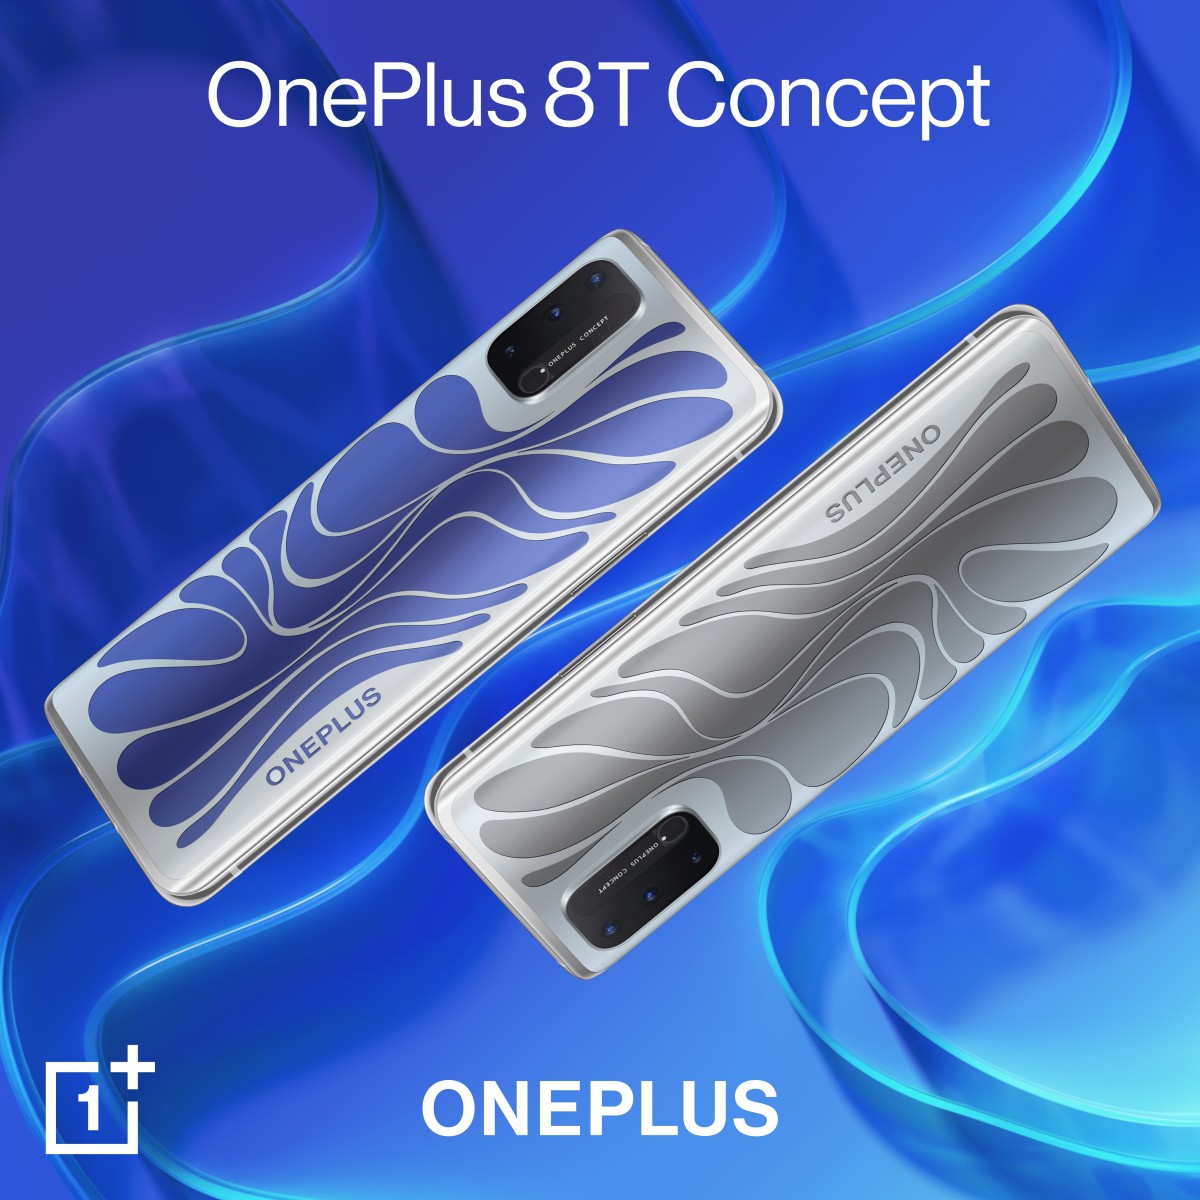 OnePlus 8T Concept device features color changing film and mmWave radar